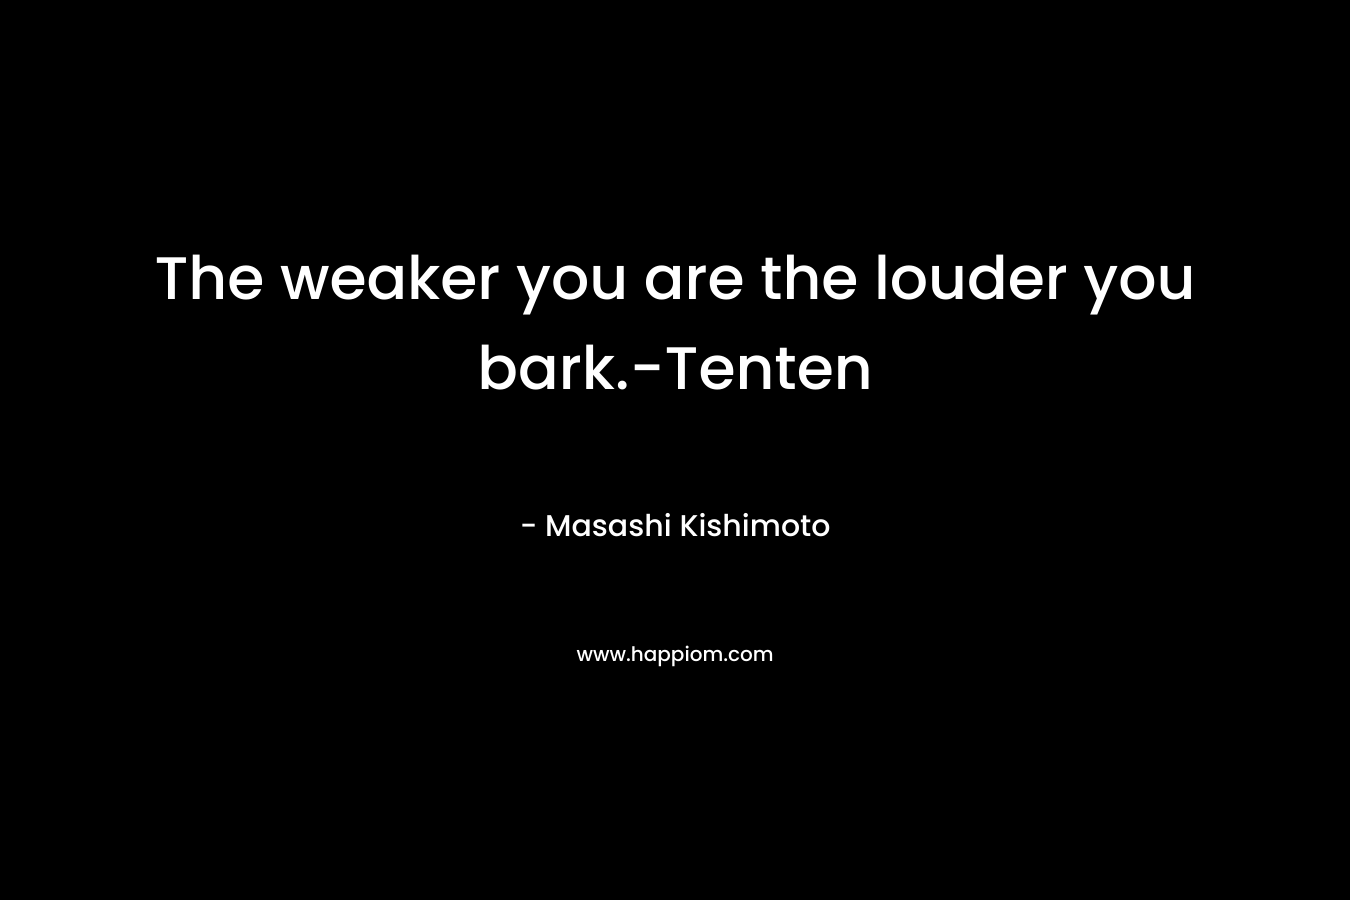 The weaker you are the louder you bark.-Tenten